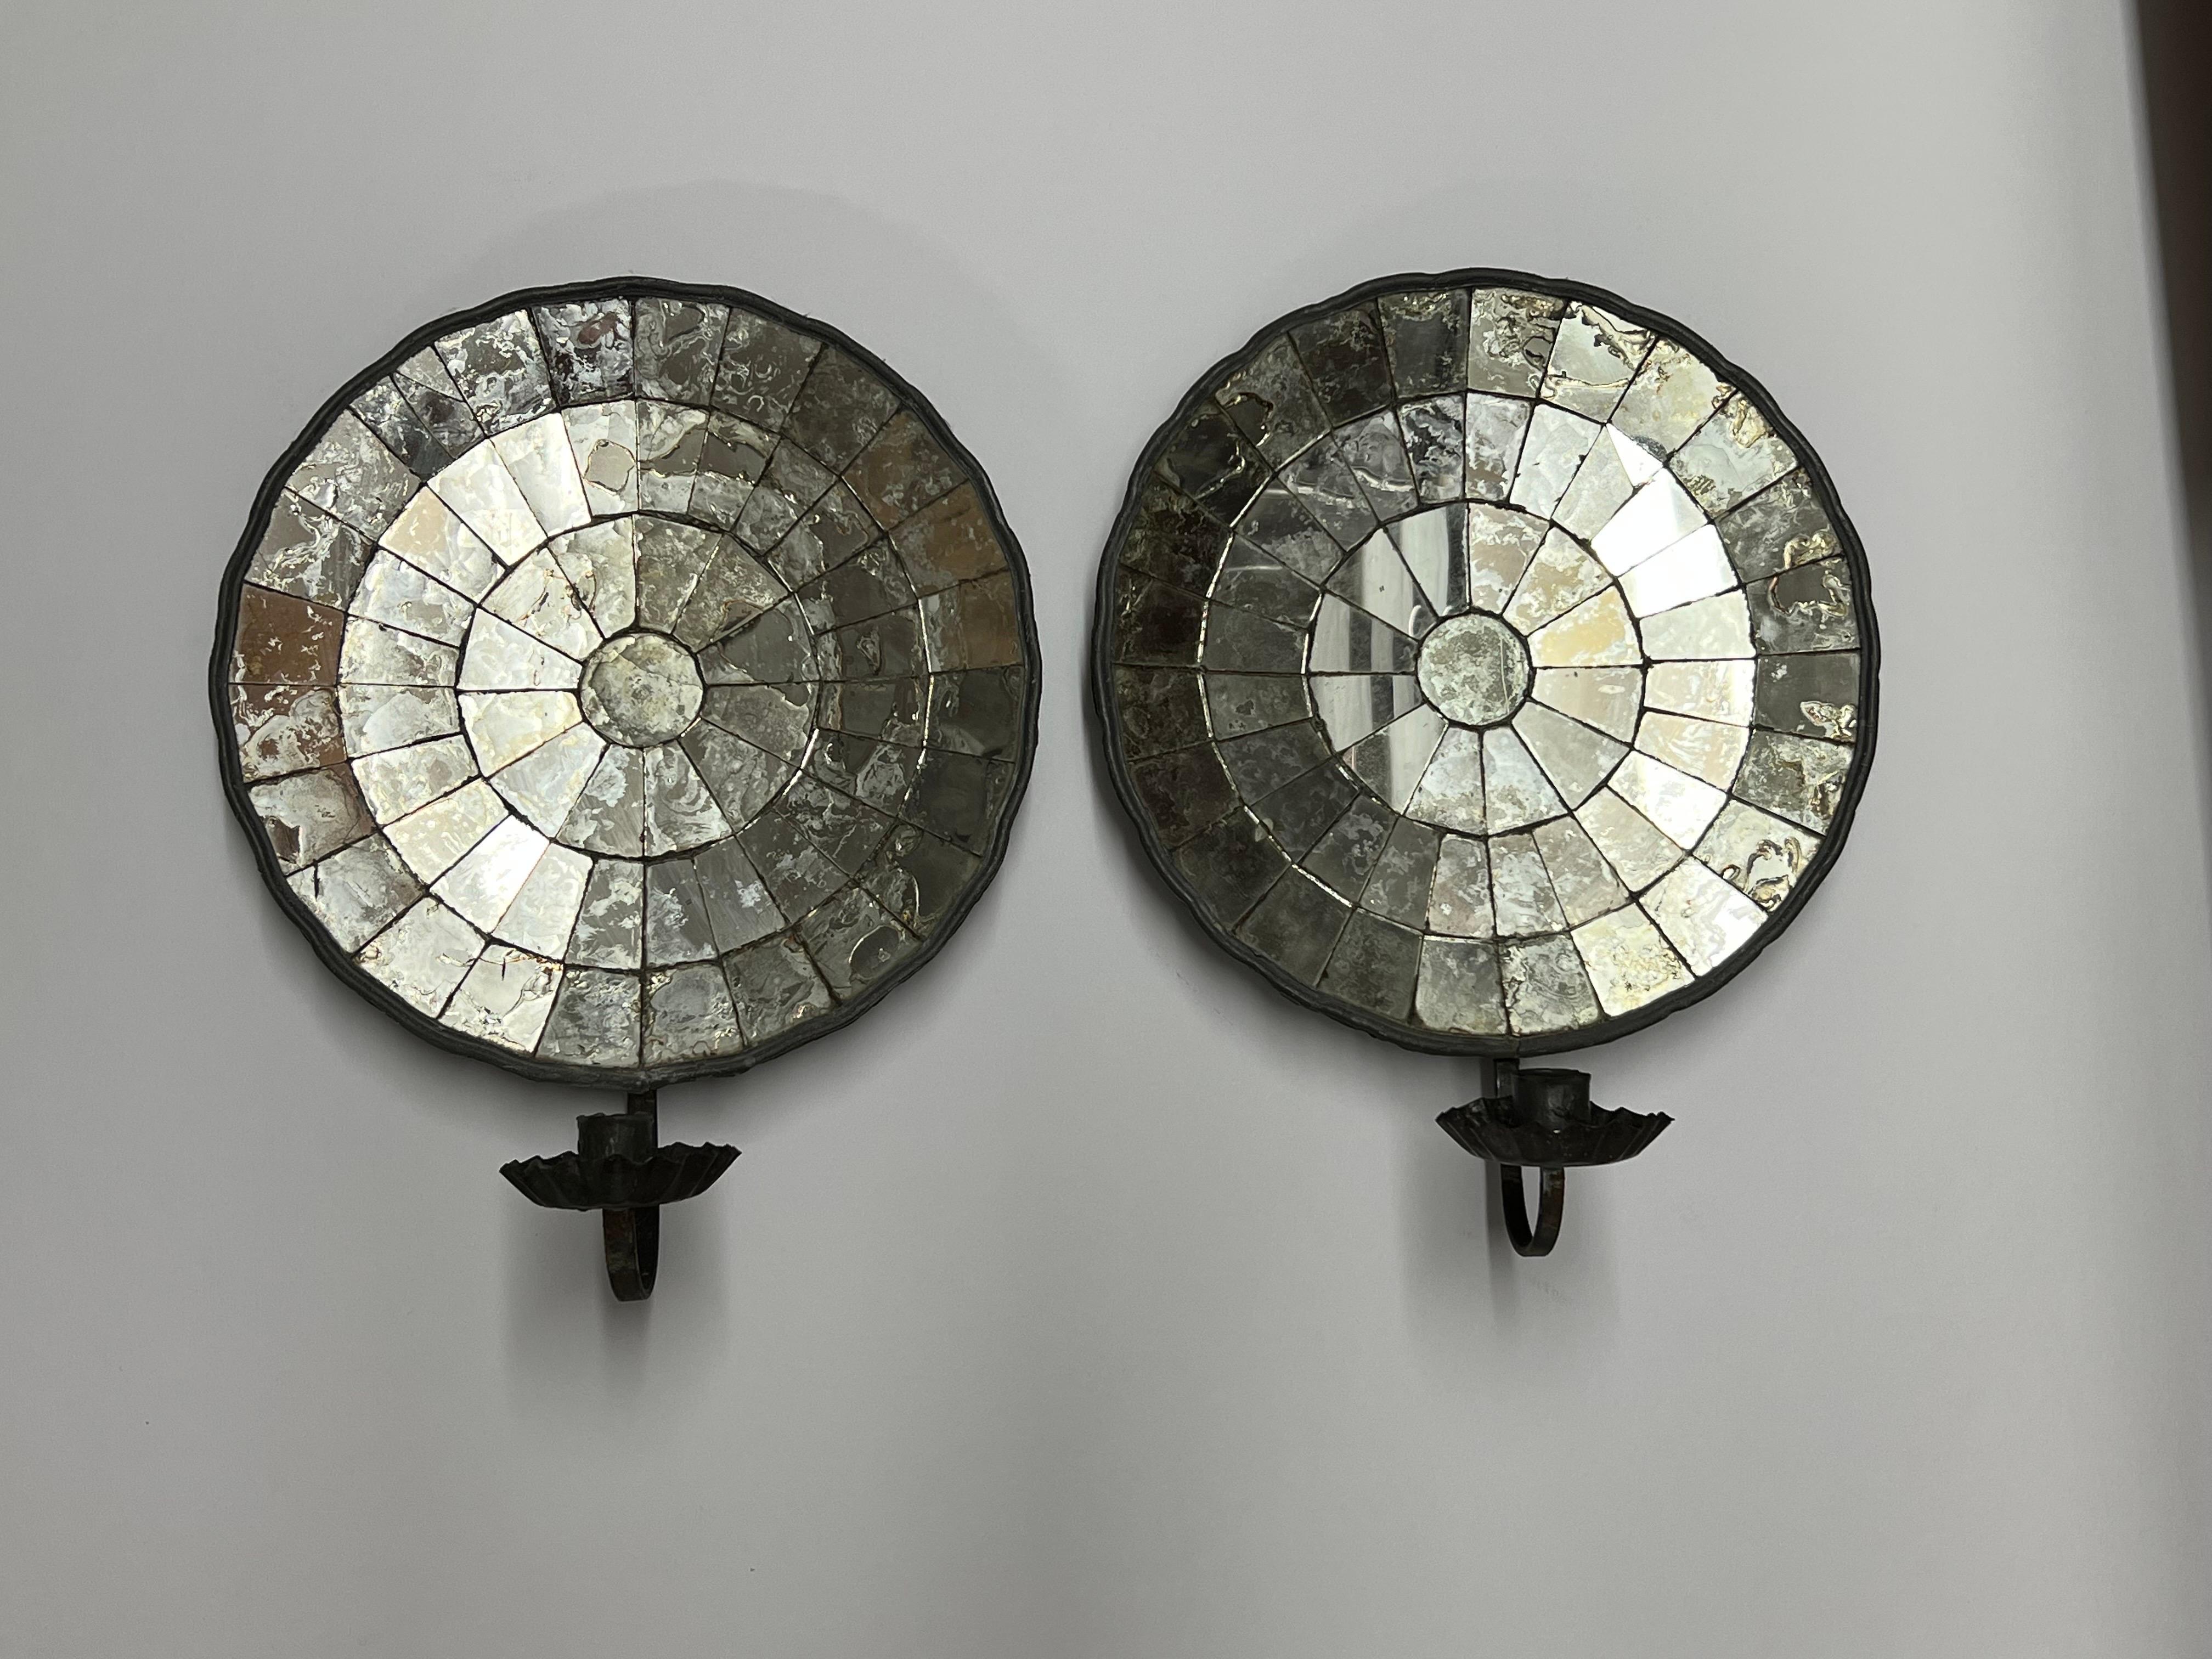 North American Pair of Early American Reflective Candle Sconces